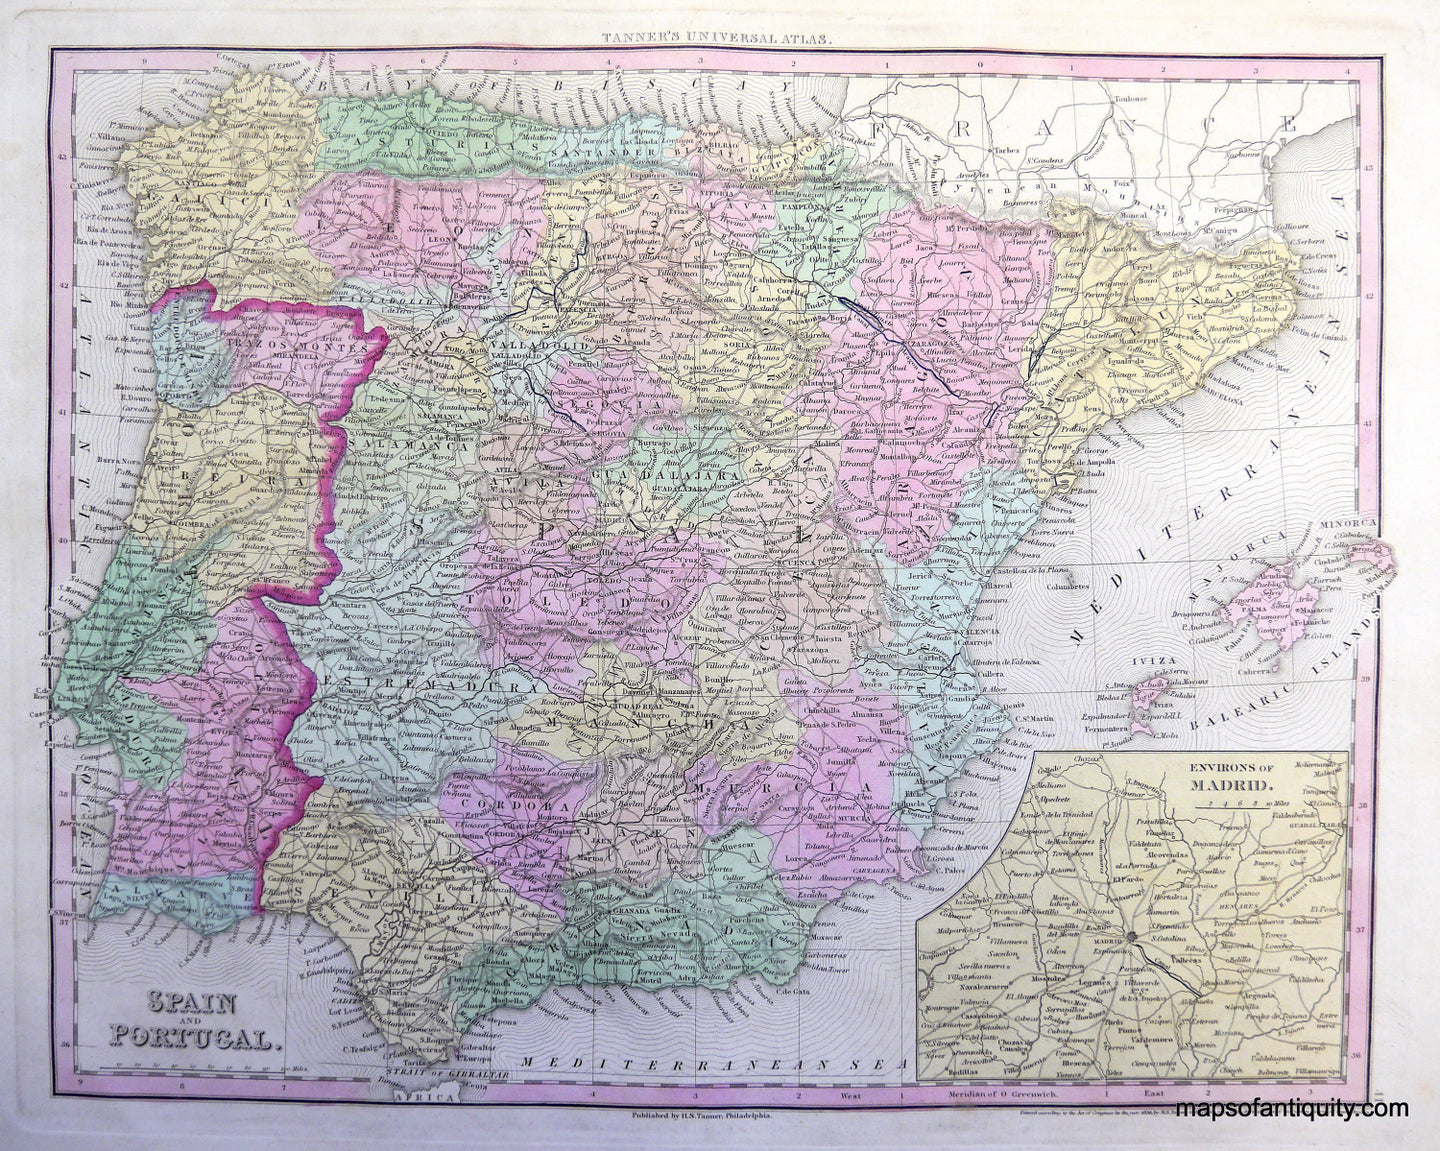 Antique-Map-Tanner-Spain-and-Portugal-1840s-1800s-Early-Mid-19th-Century-Maps-of-Antiquity